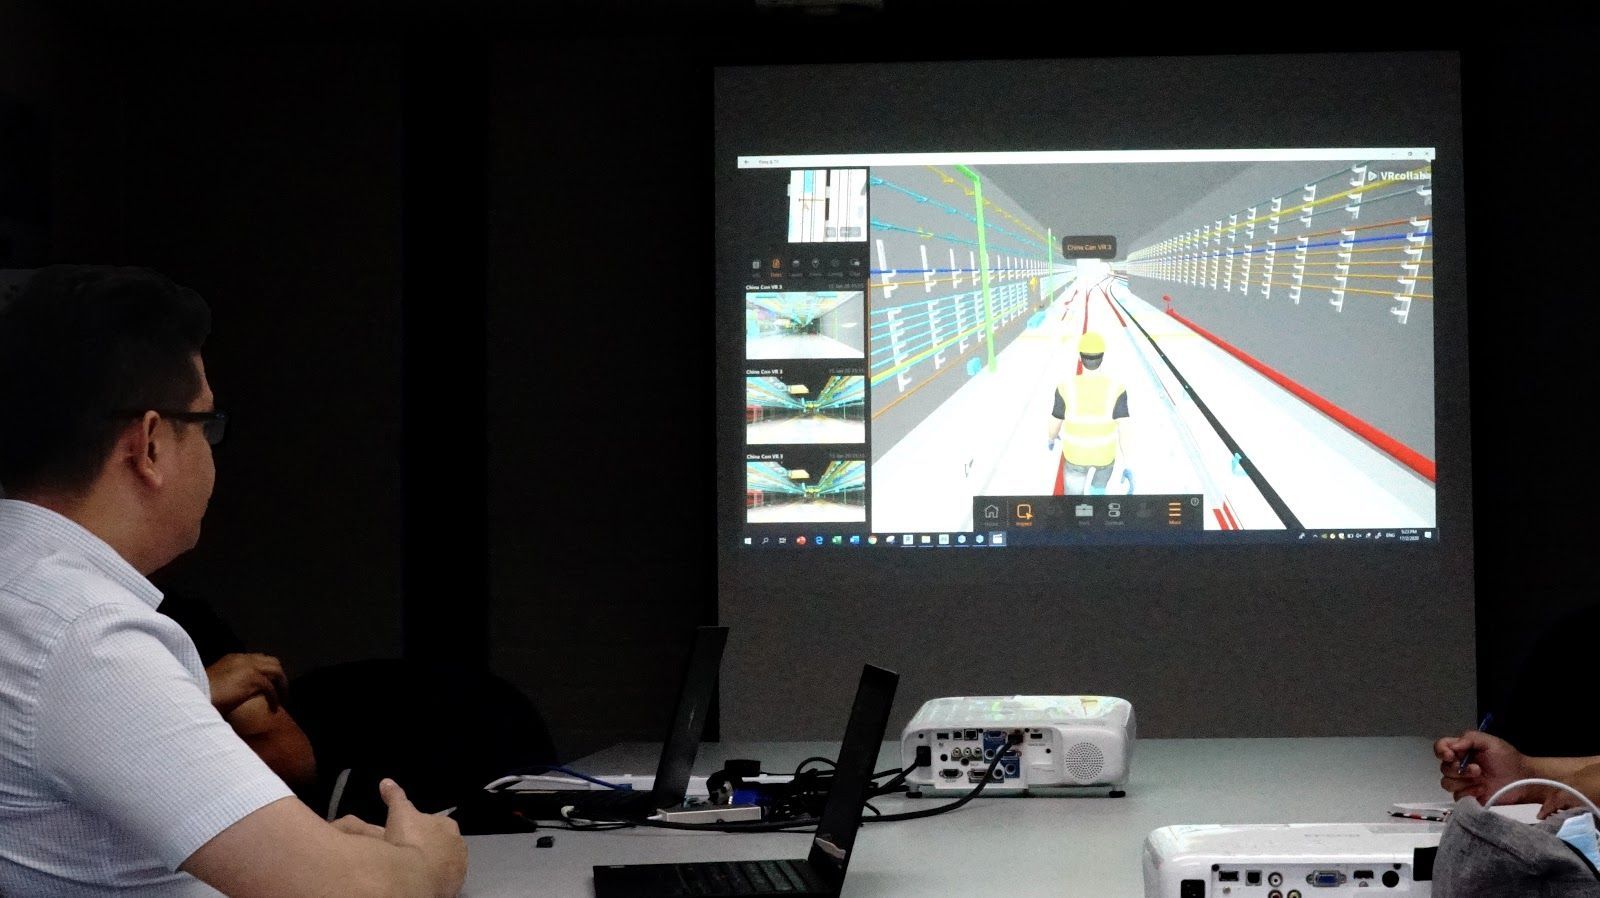 Case Study: How China Construction Uses Virtual Reality in Coordination Meetings